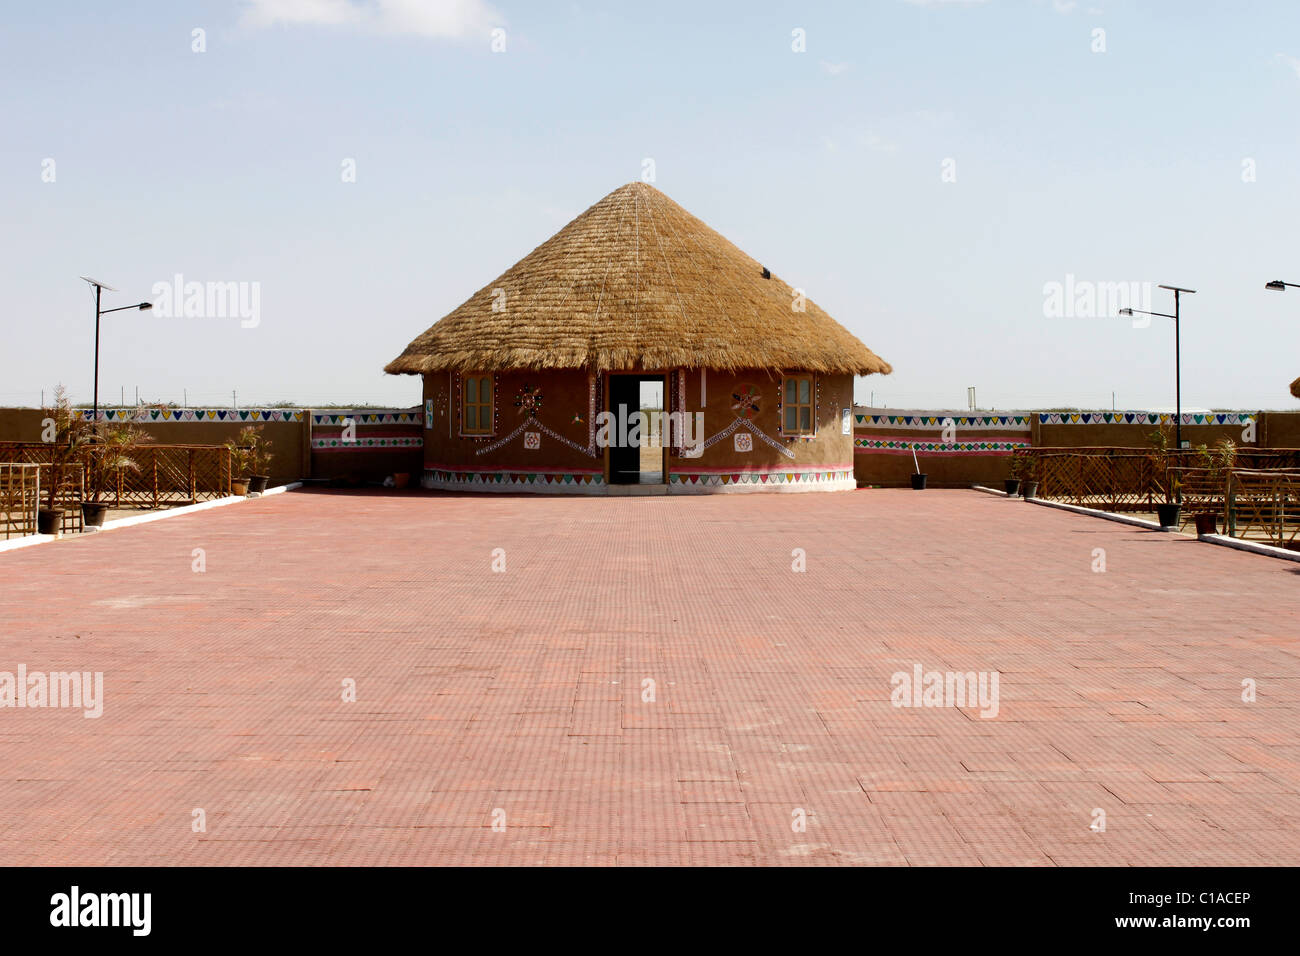 A traditional hut in Kutch, Gujarat, India Stock Photo